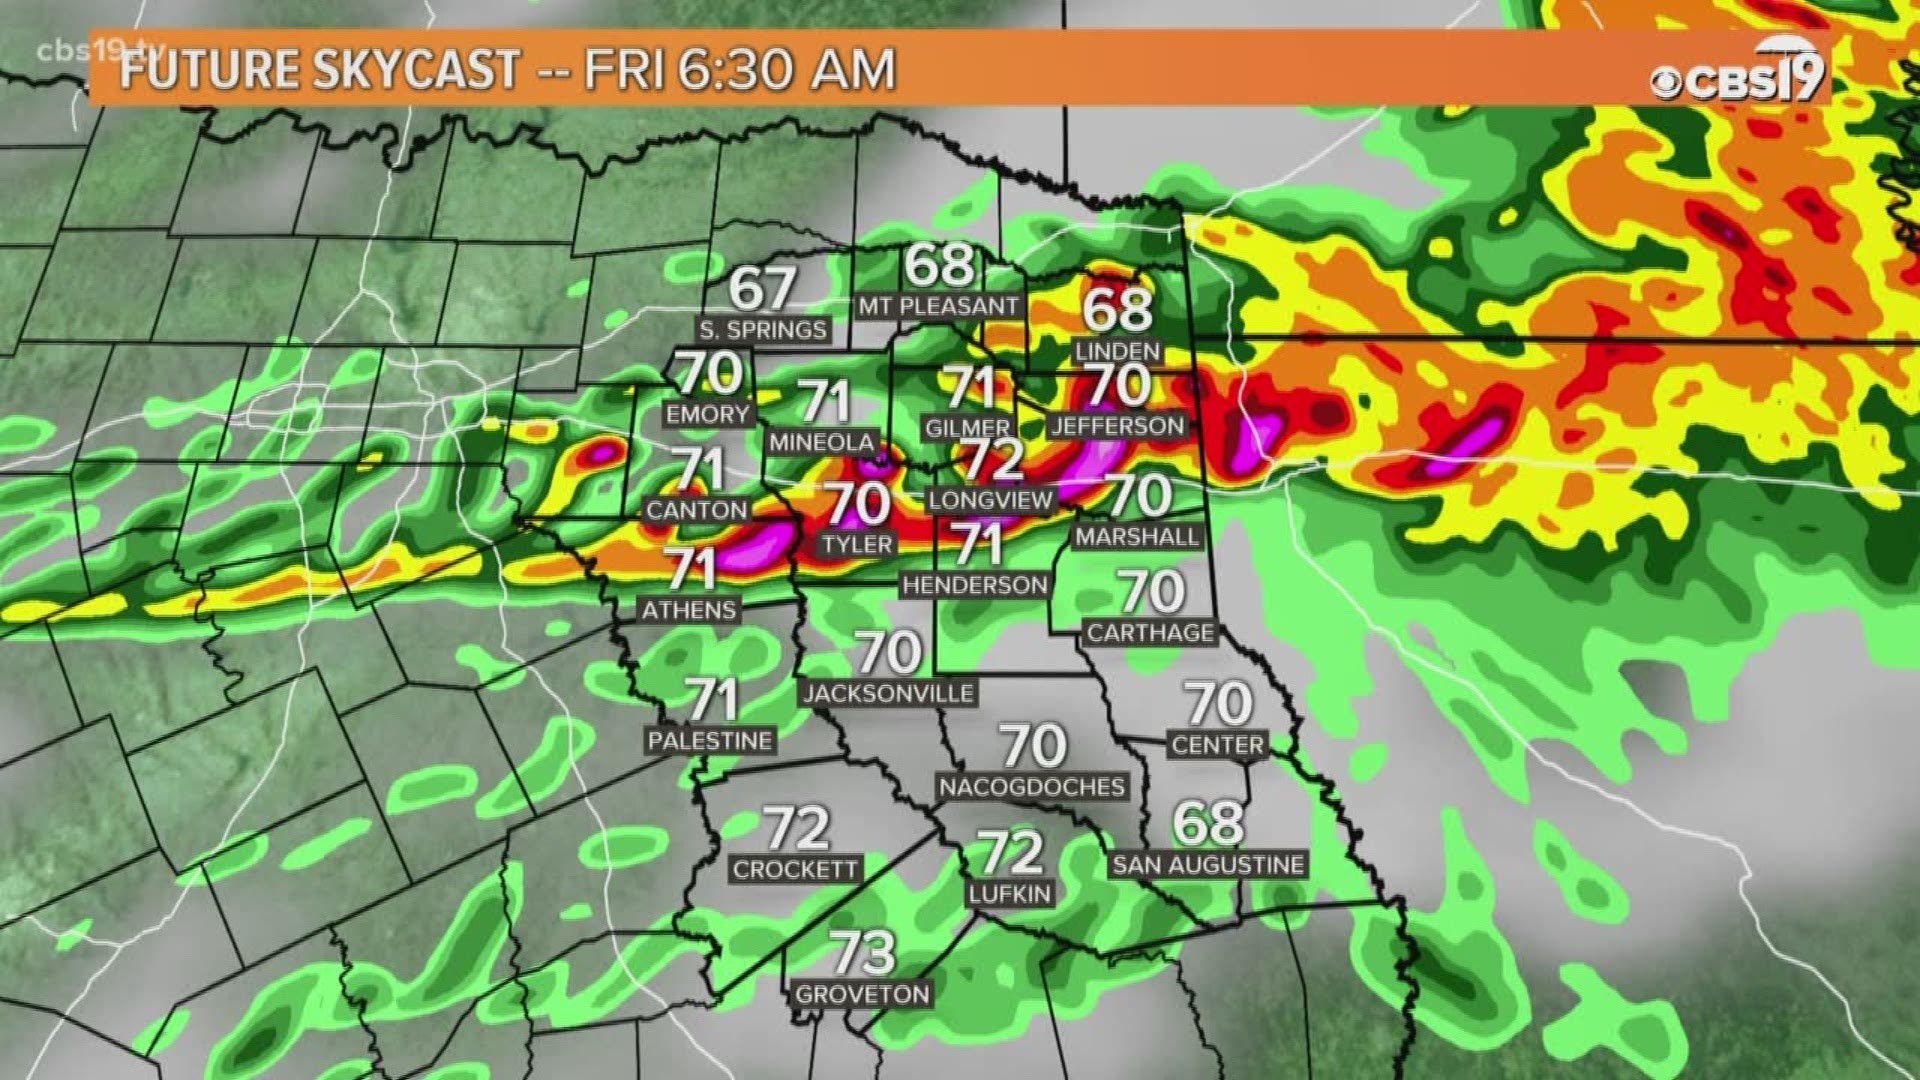 A storm filled morning for East Texas, but things will clear later today. Meteorologist Michael Behrens has the latest.